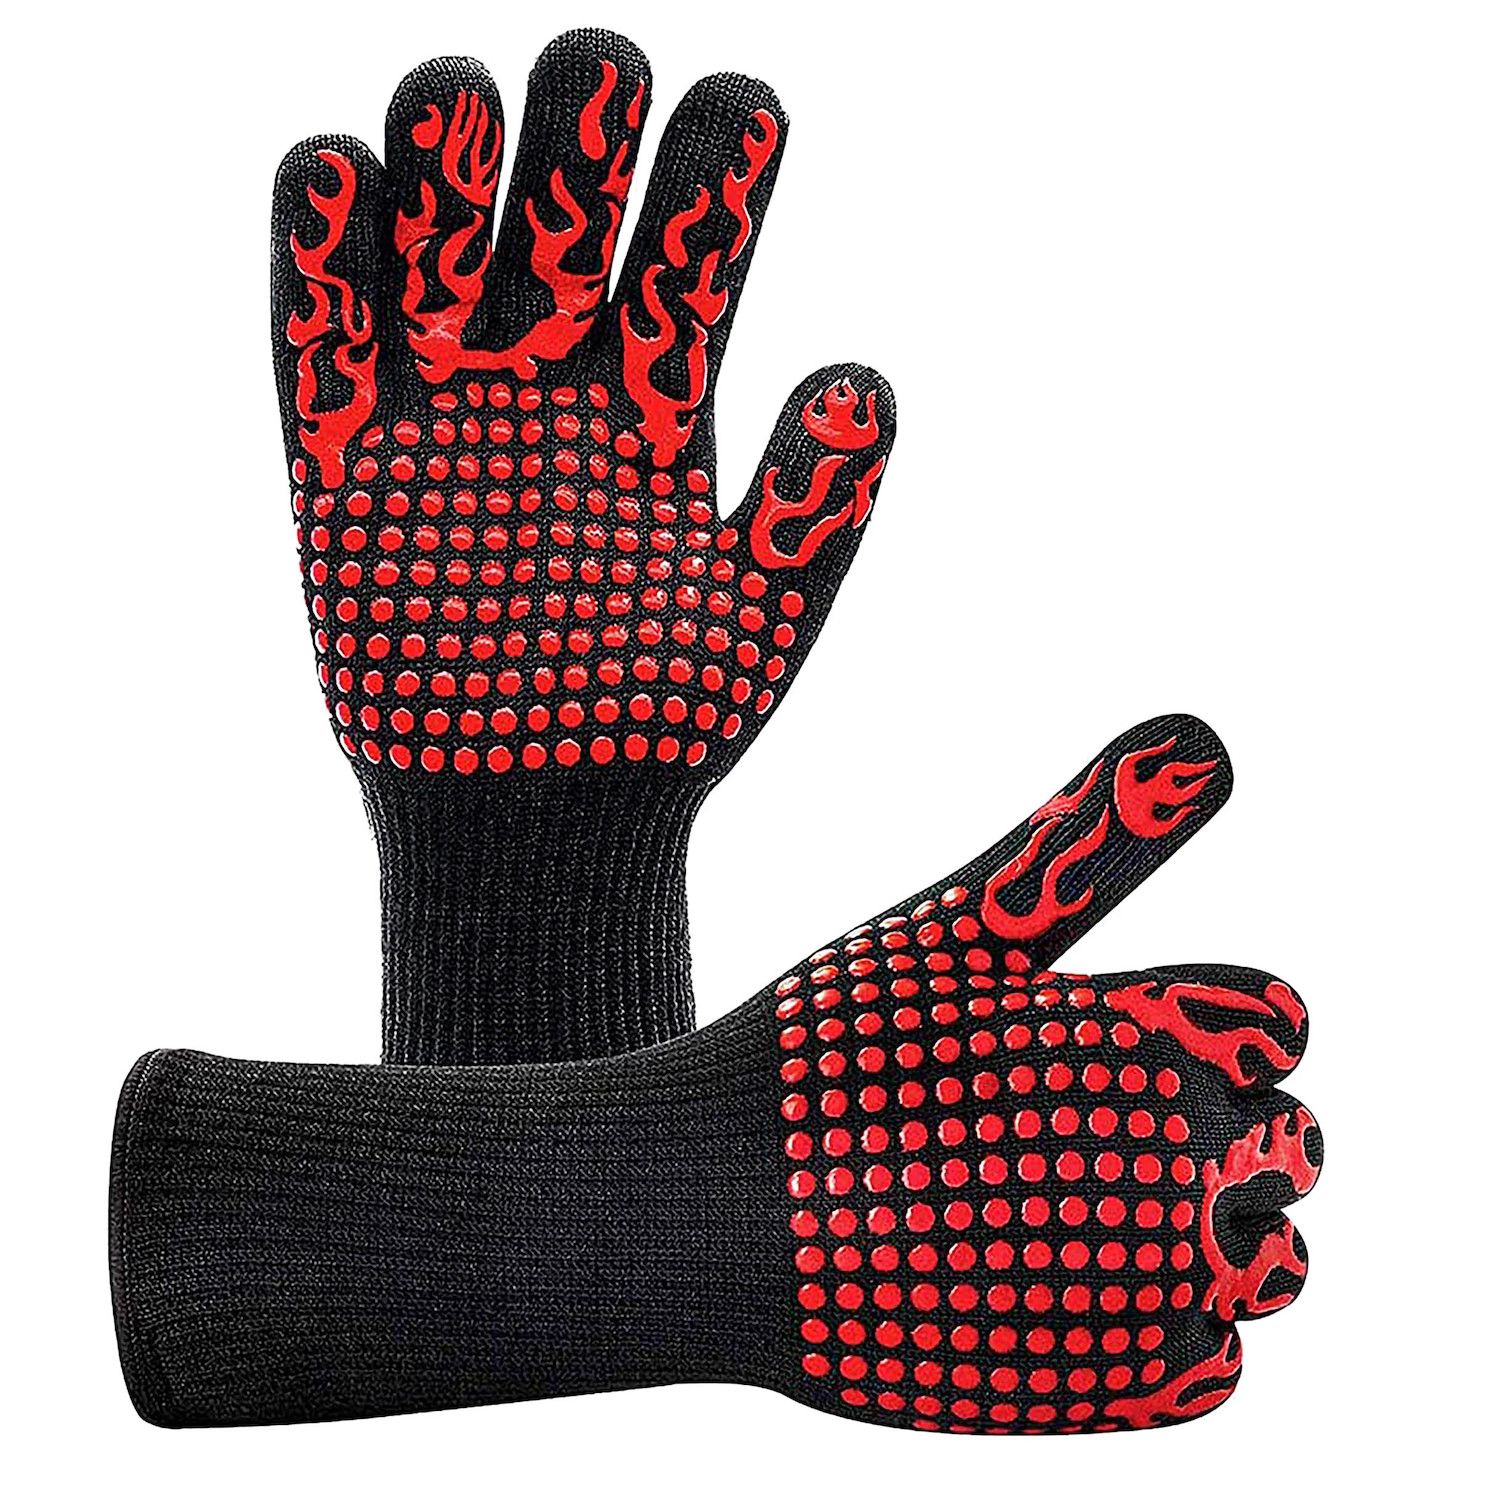 Zulay Kitchen Non Slip Grip Oven Mitts Heat Resistant - Long Protective  Gloves